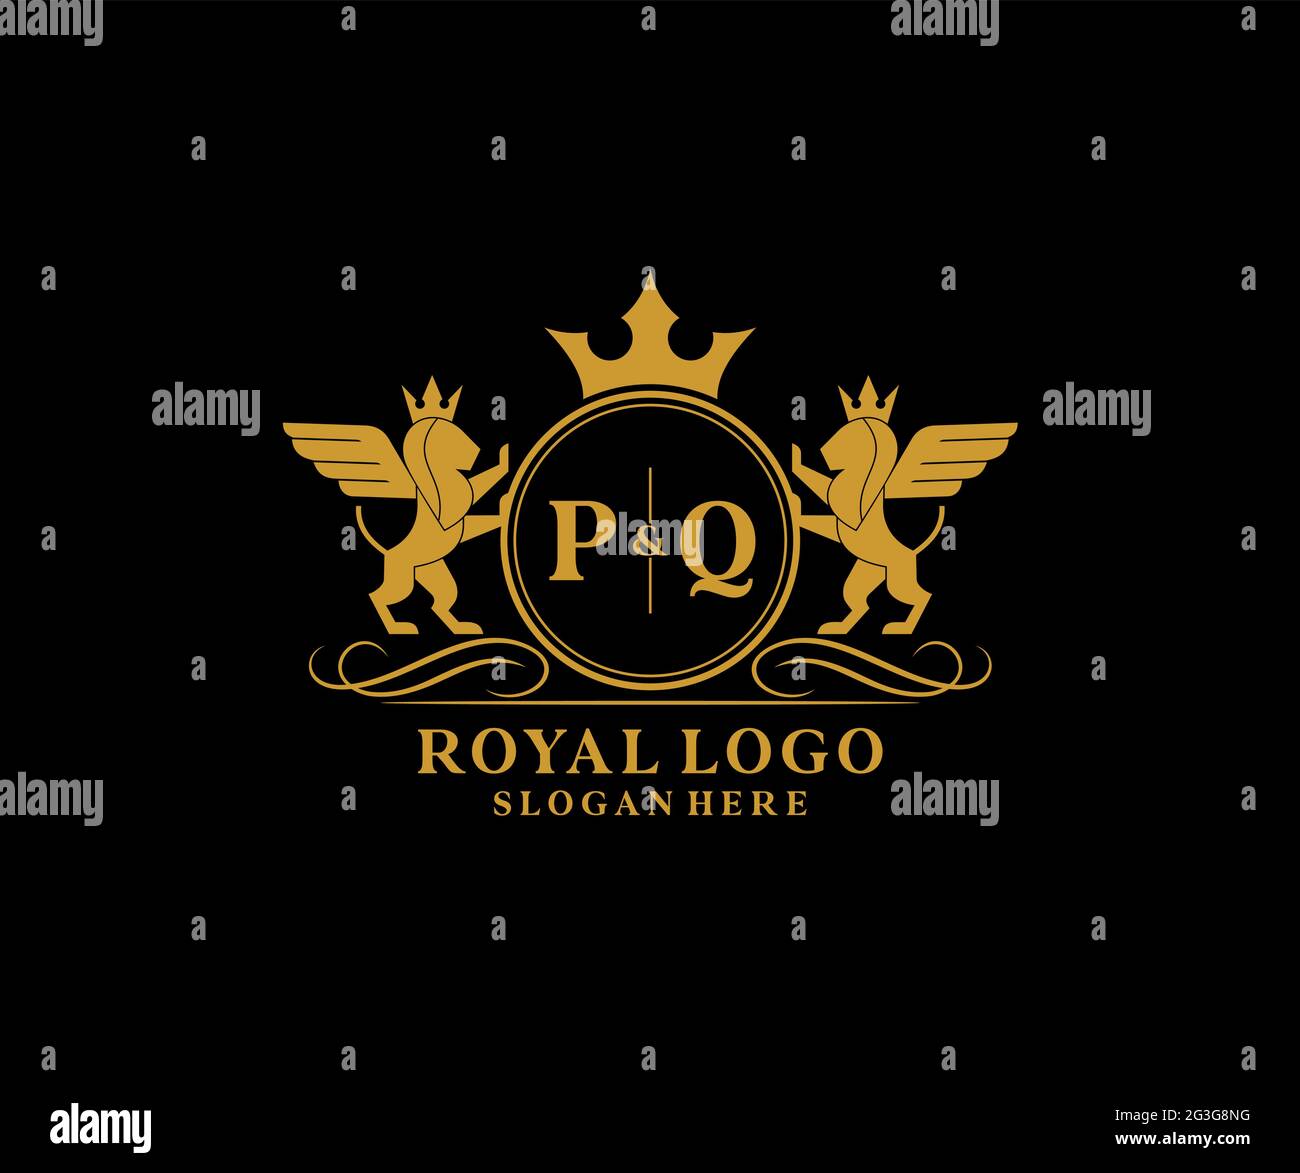 PQ Letter Lion Royal Luxury Heraldic,Crest Logo template in vector art for Restaurant, Royalty, Boutique, Cafe, Hotel, Heraldic, Jewelry, Fashion and Stock Vector